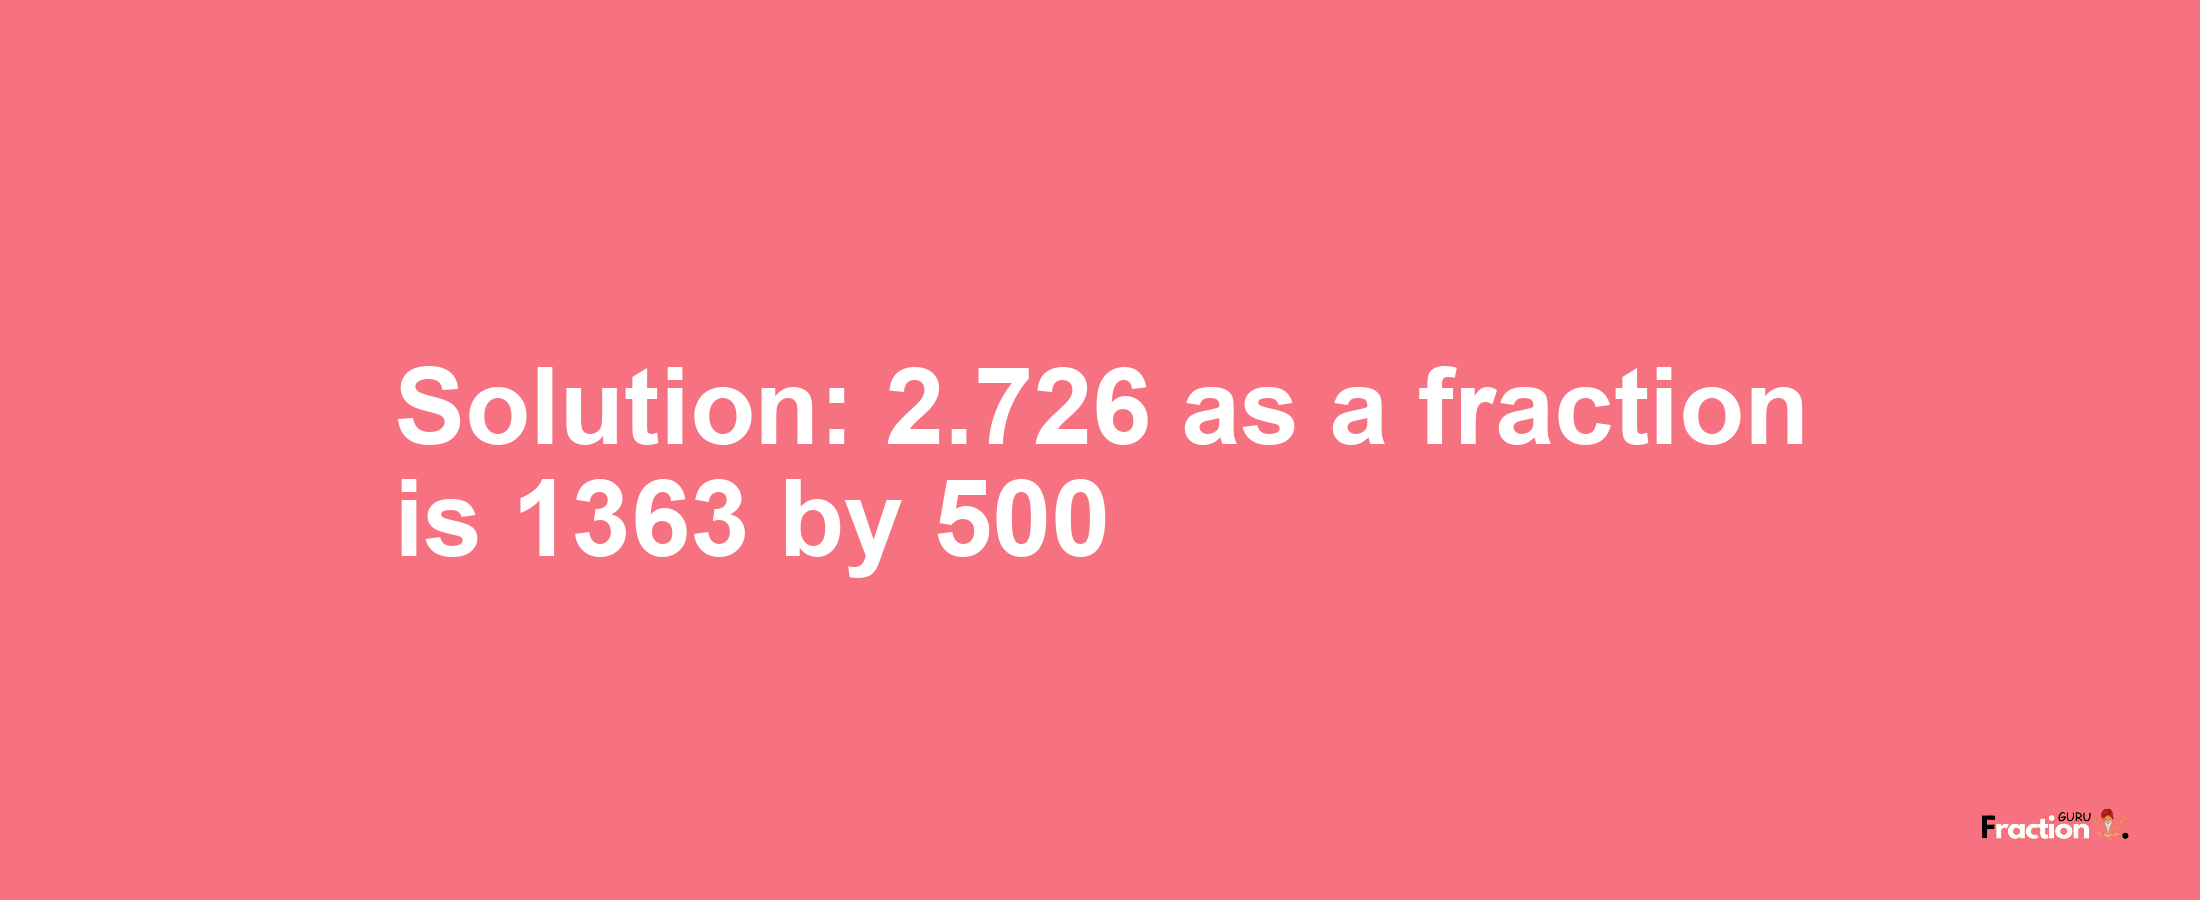 Solution:2.726 as a fraction is 1363/500